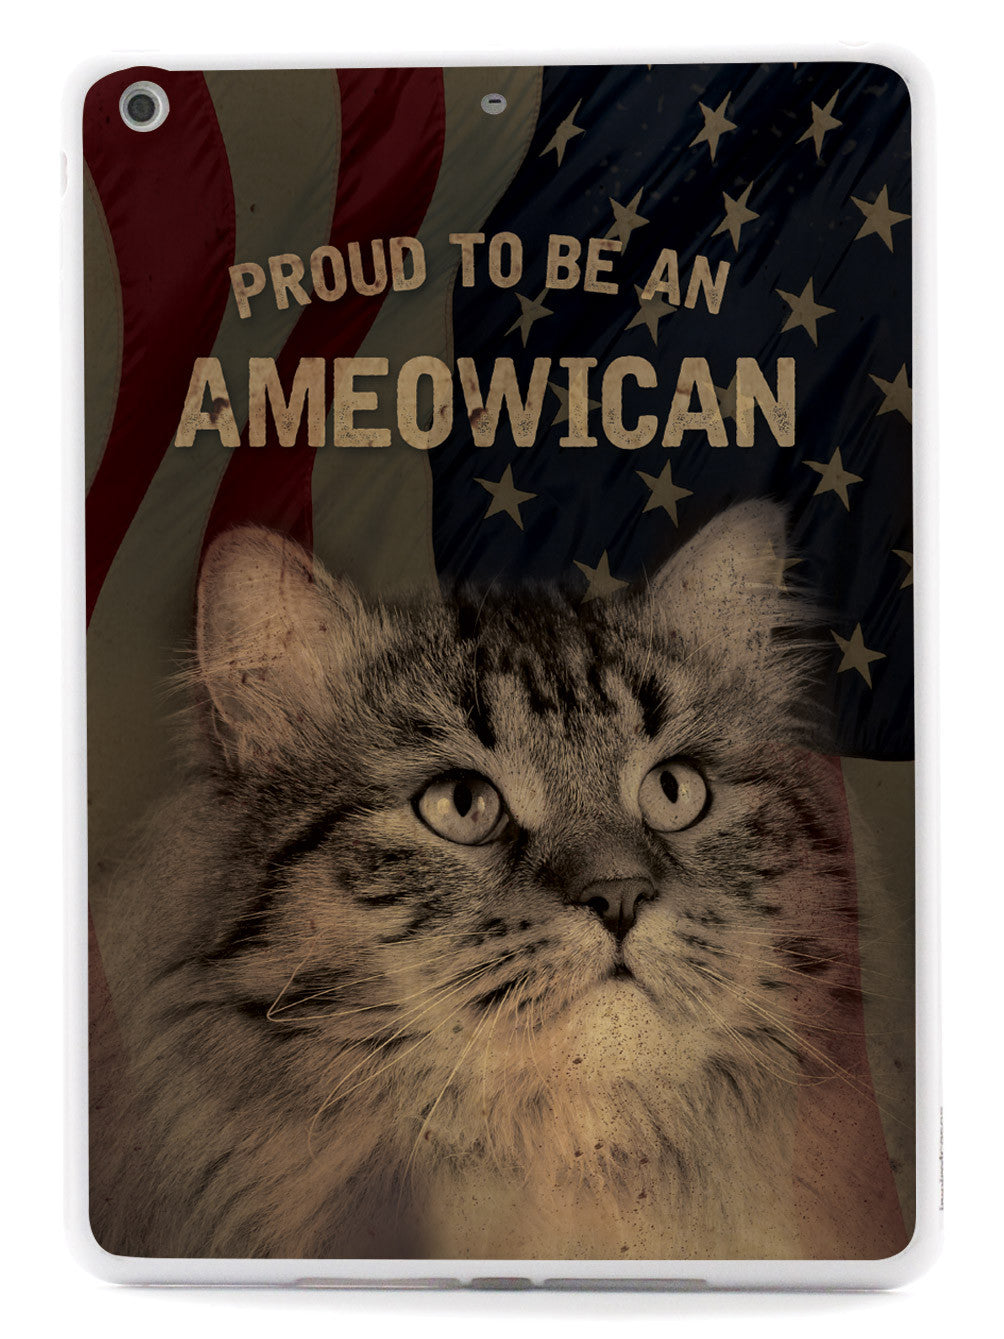 Proud to be an Ameowican - Patriotic Case